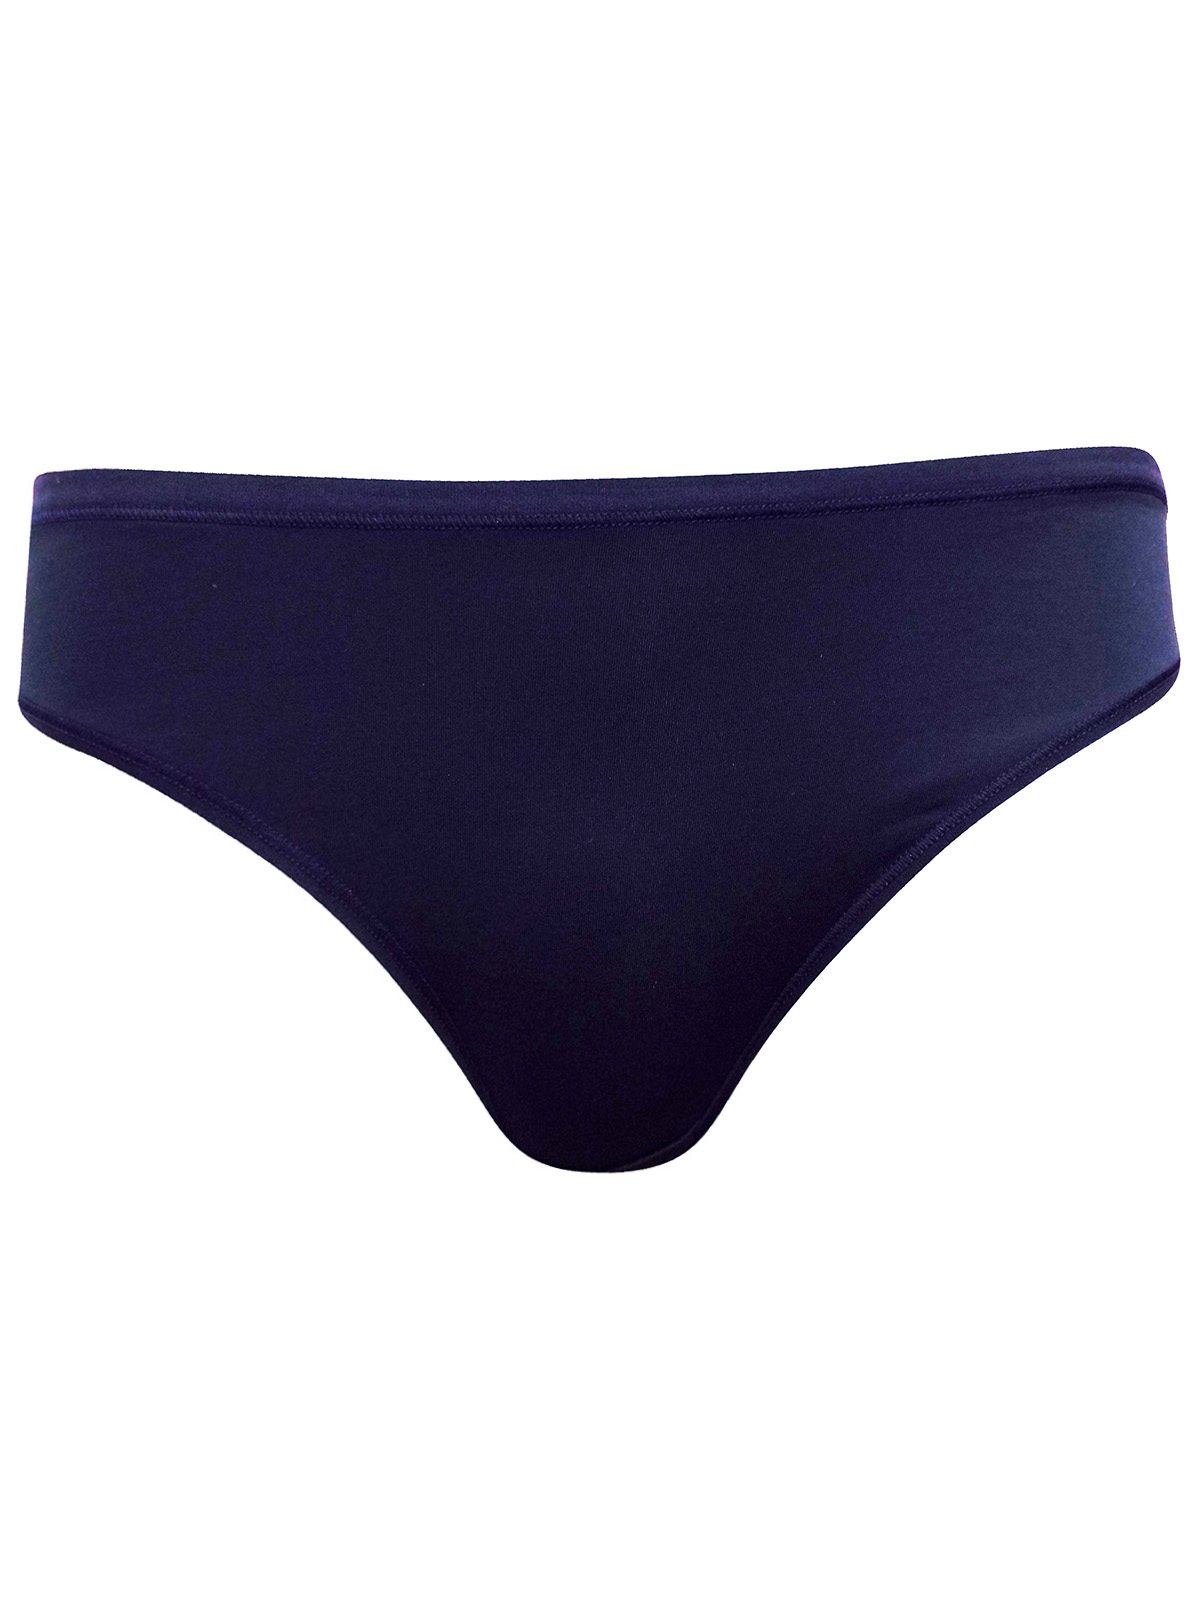 F&F Plain & Patented No VPL Silky Smooth High Leg Knickers Size 12 to 22  (041101